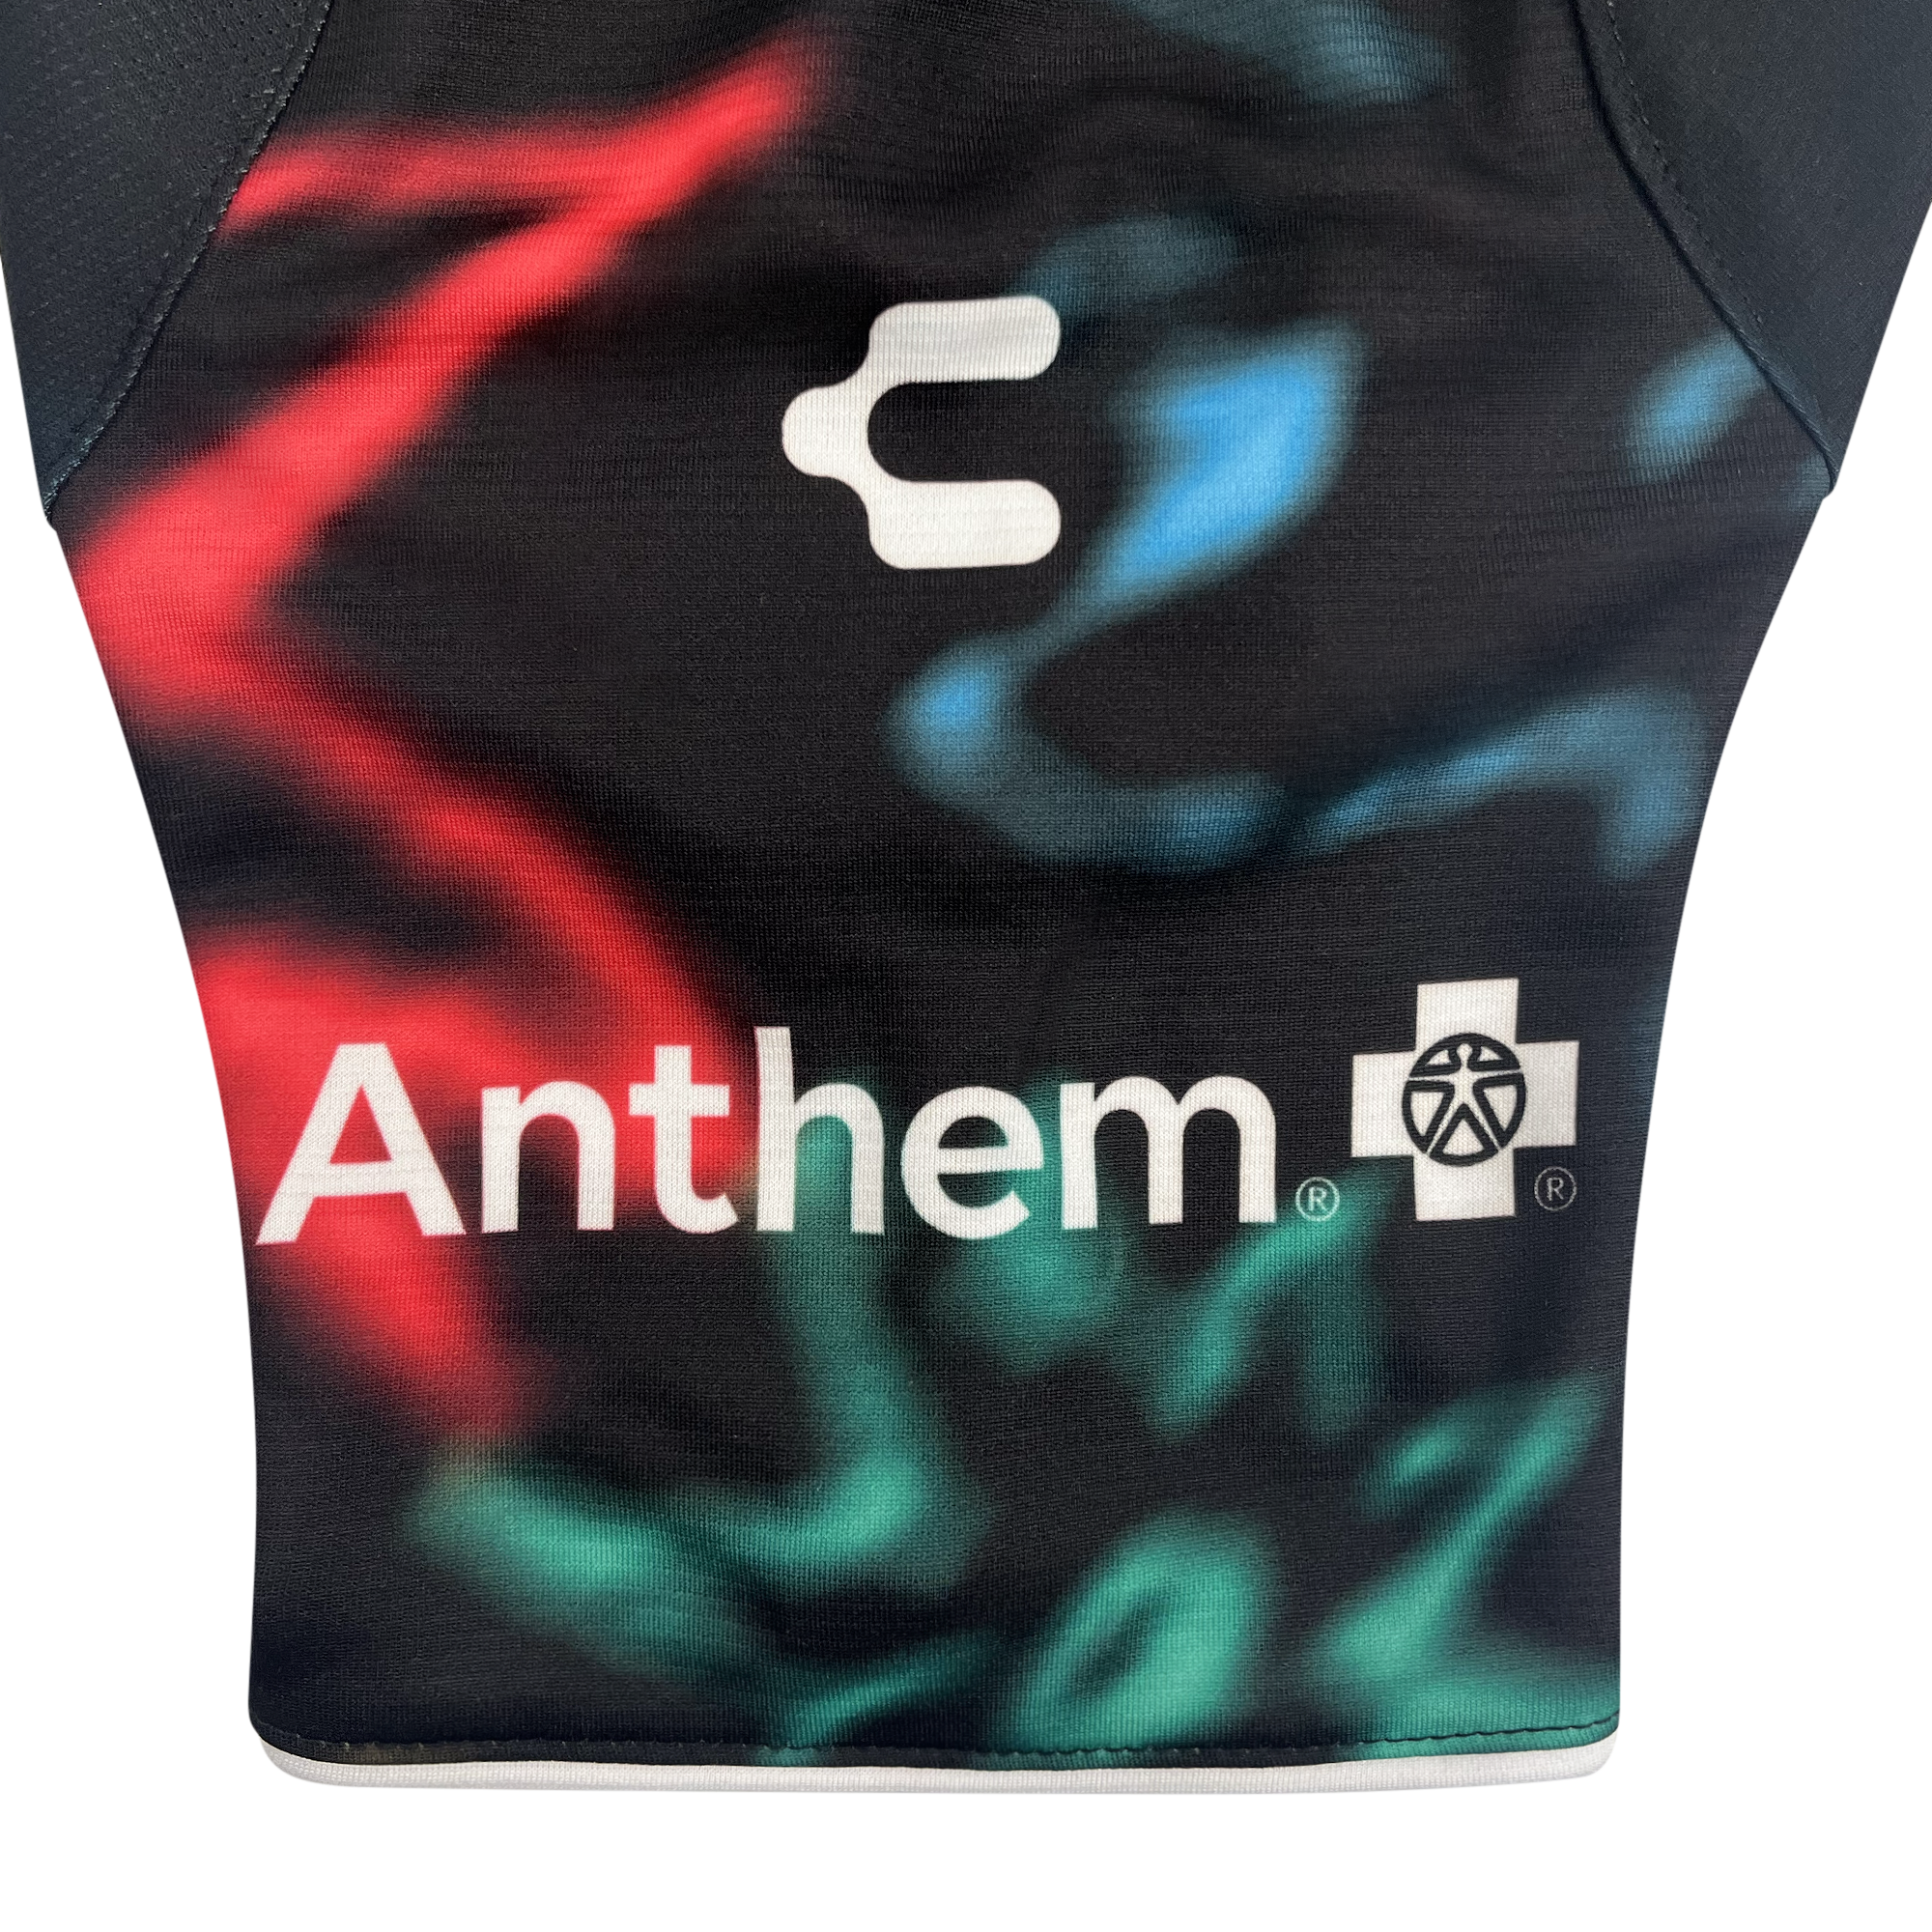 Detailed view of Charly and Anthem Blue Cross logo on  multicolored sleeve.